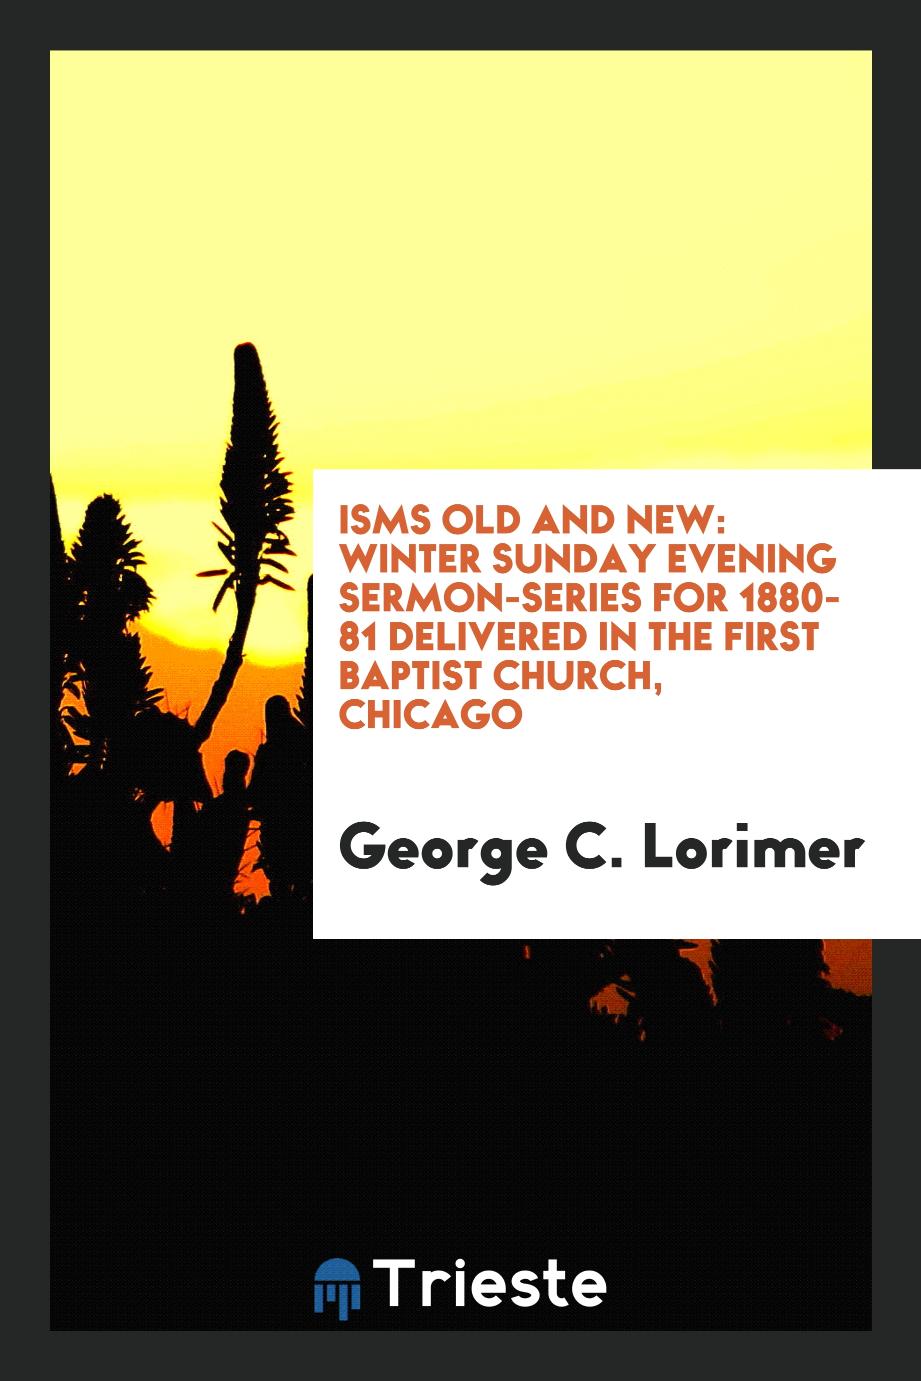 Isms Old and New: Winter Sunday Evening Sermon-Series for 1880-81 Delivered in the First Baptist Church, Chicago